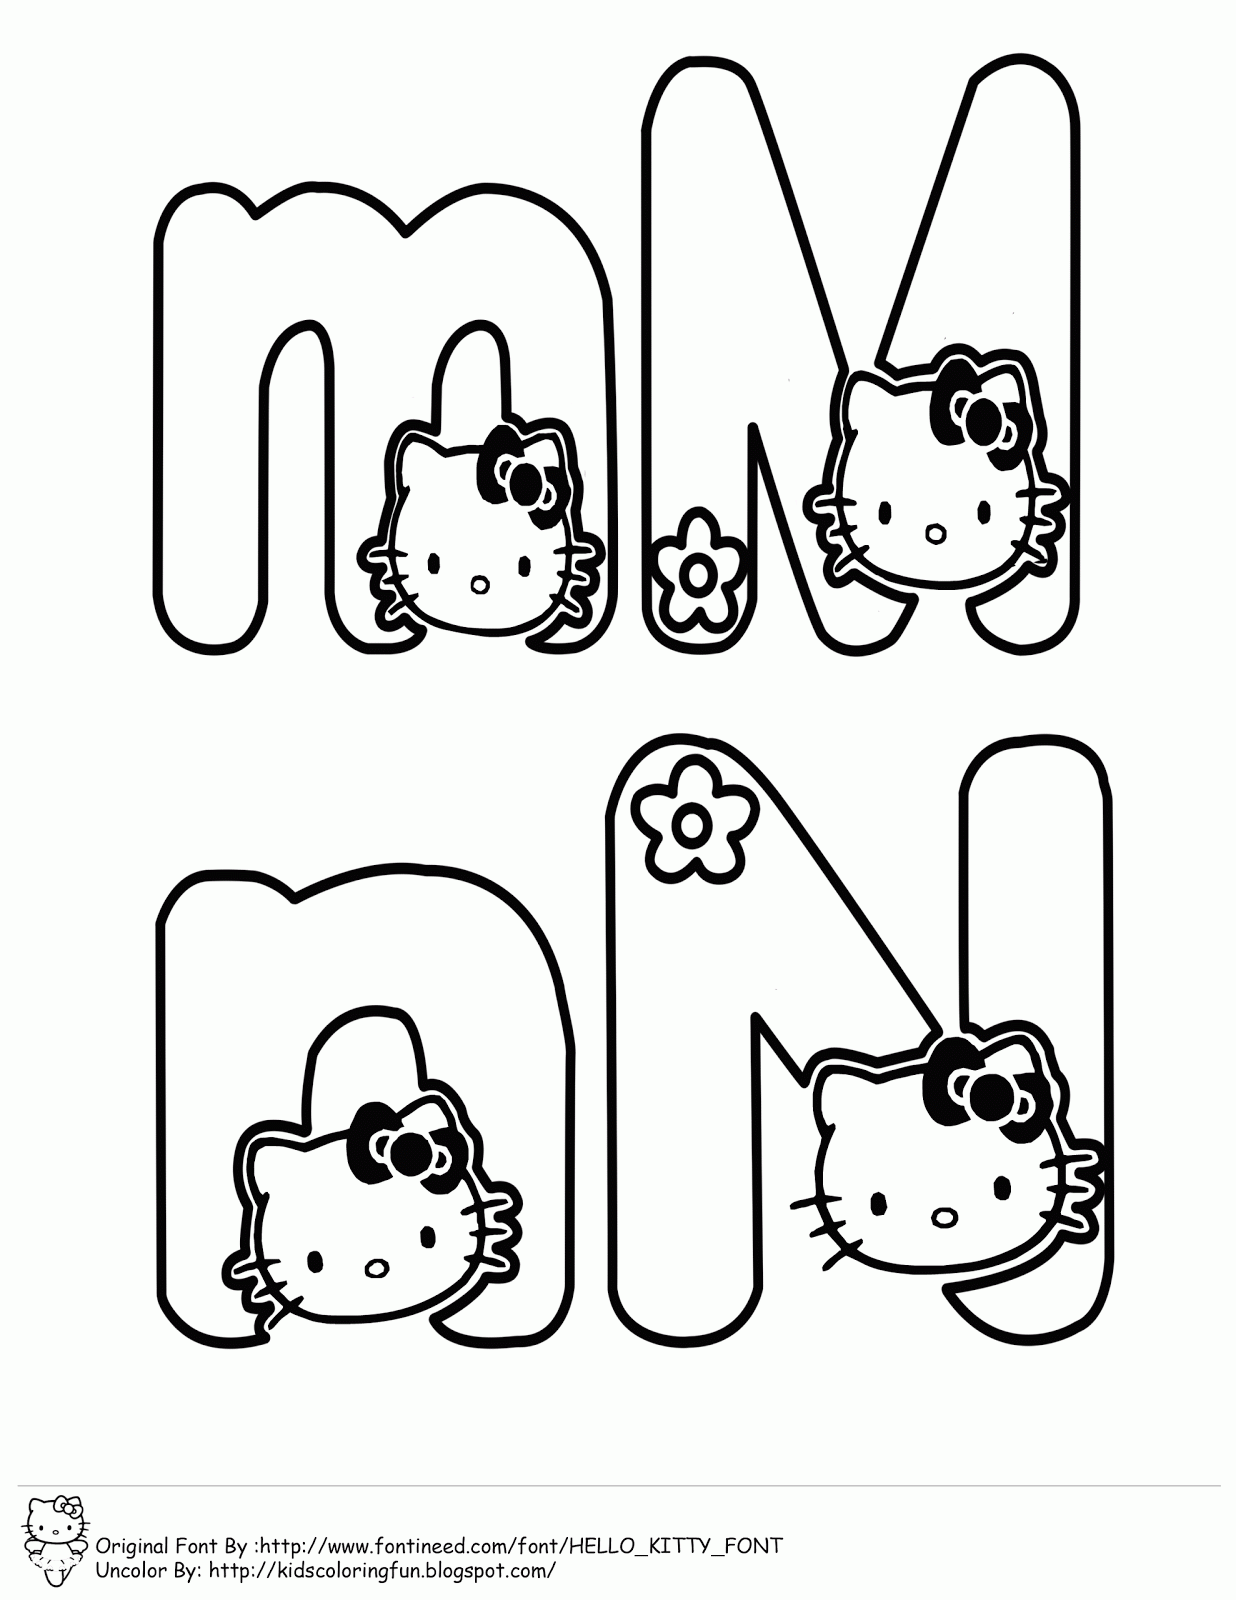 Learning ABC With Hello Kitty | Learn To Coloring